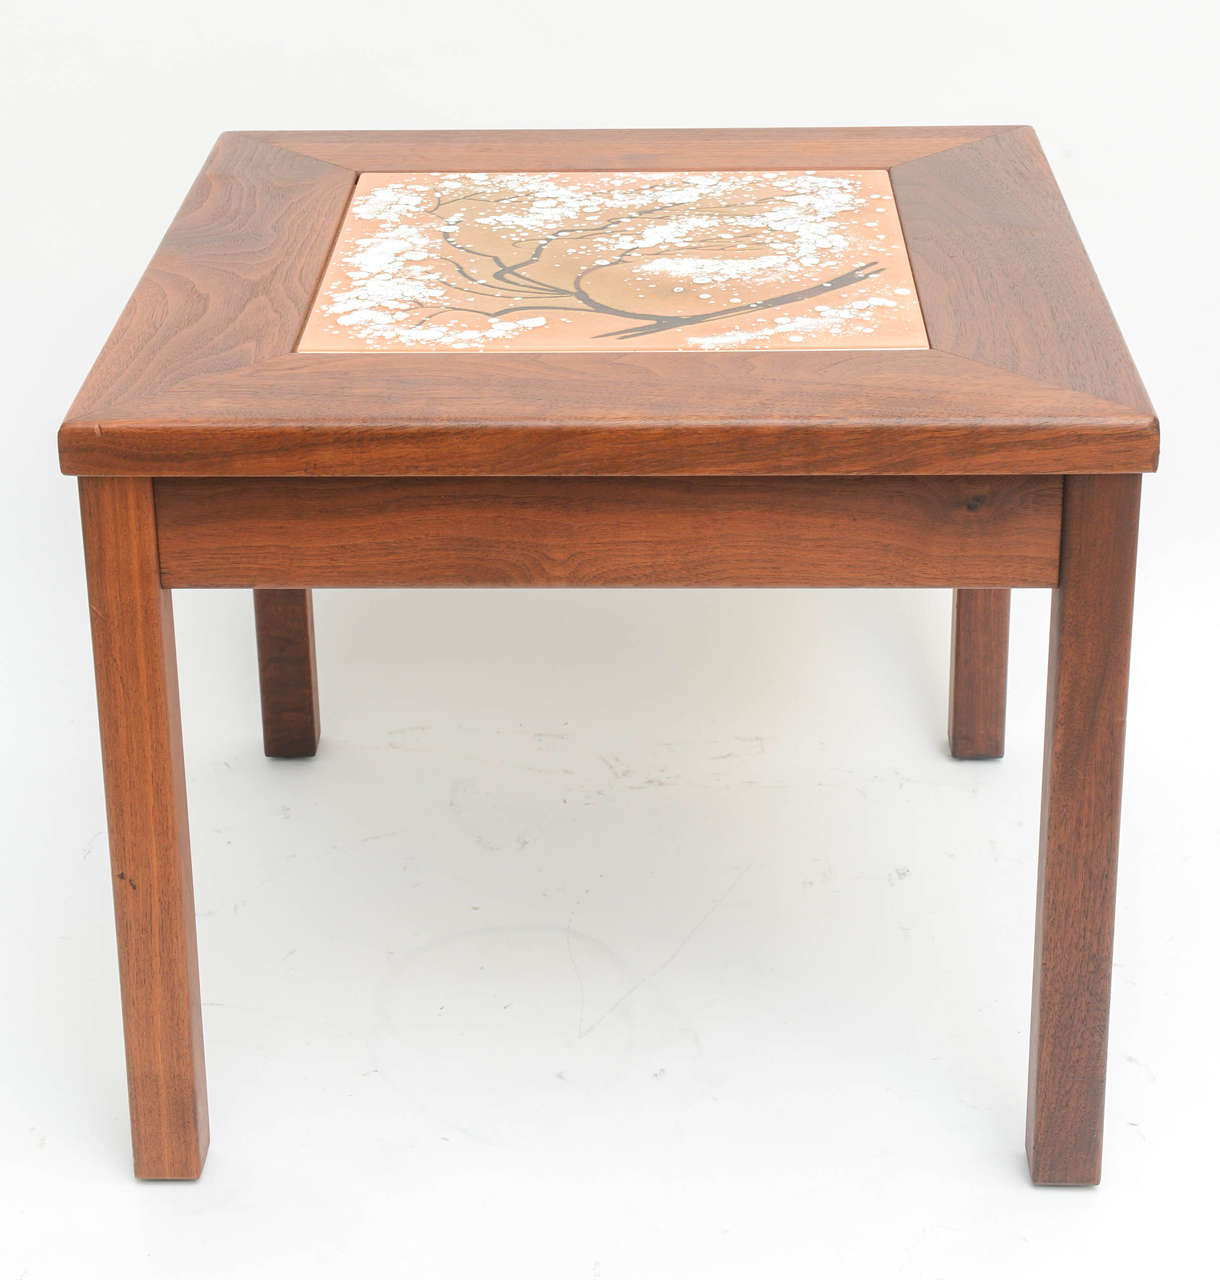 Mid-Century Modern Midcentury Modern Walnut Table with an Enamel on Copper Inset by Brown Saltman  For Sale